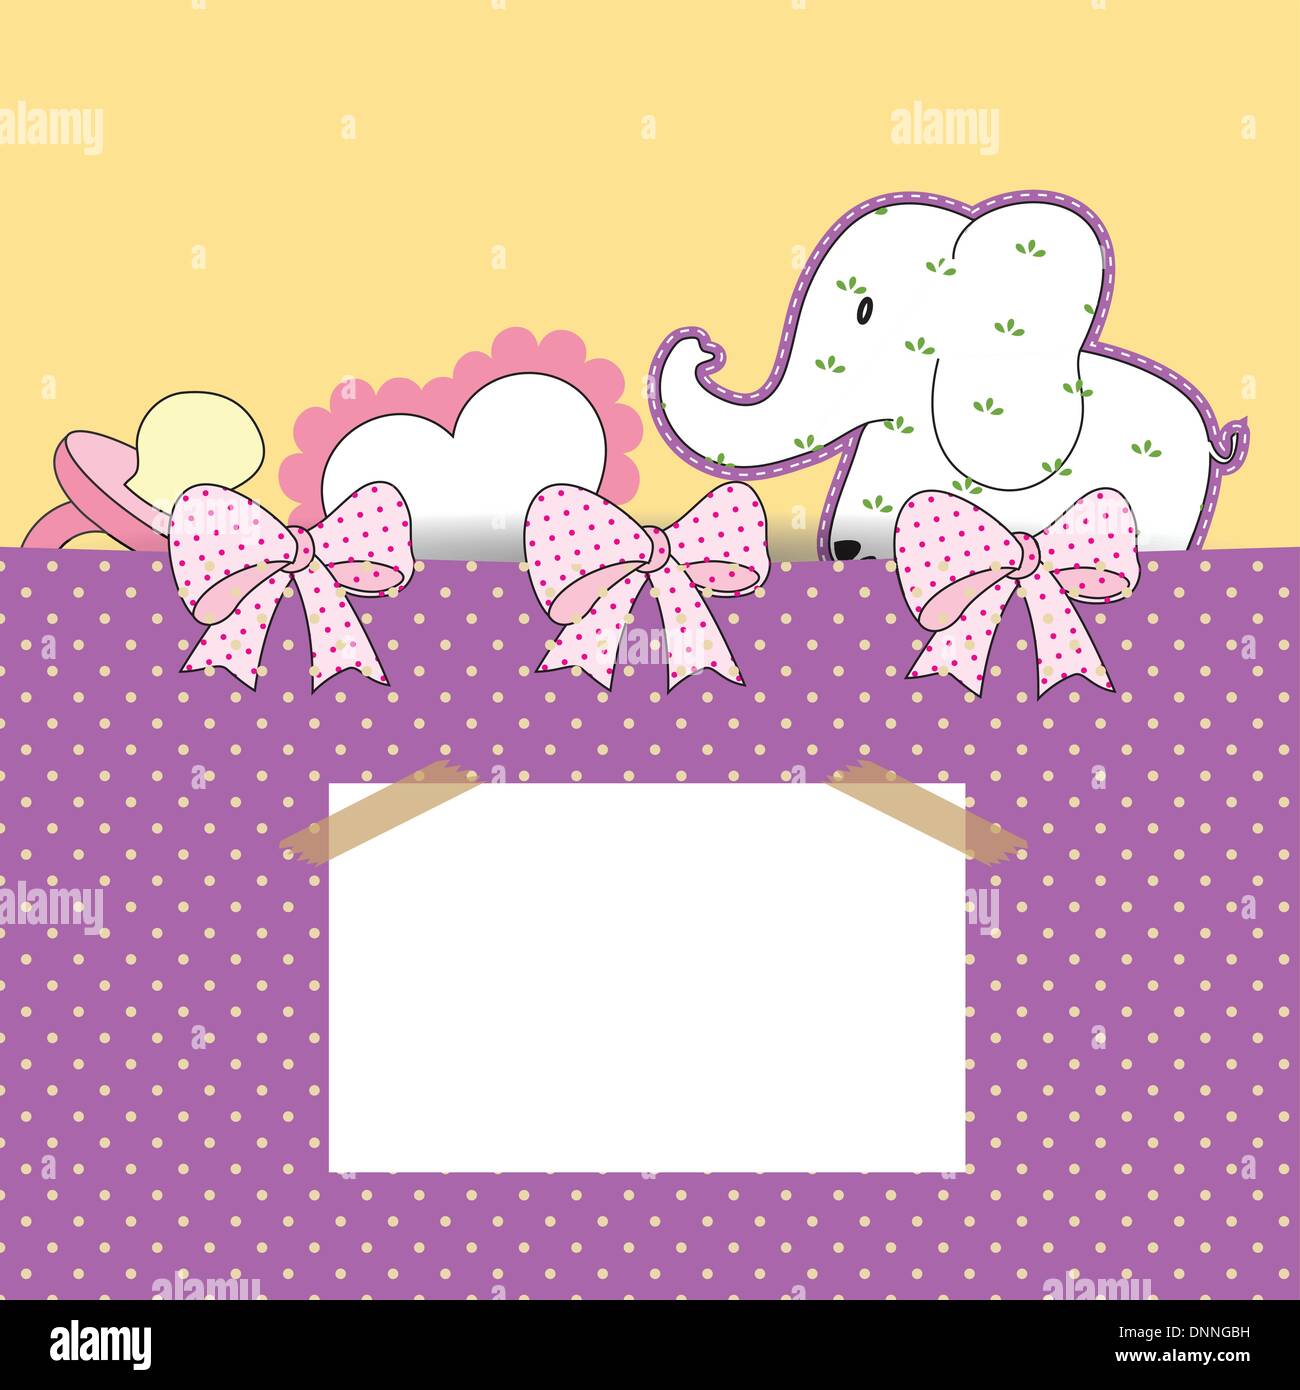 Cute baby background or birthday or shower Stock Vector